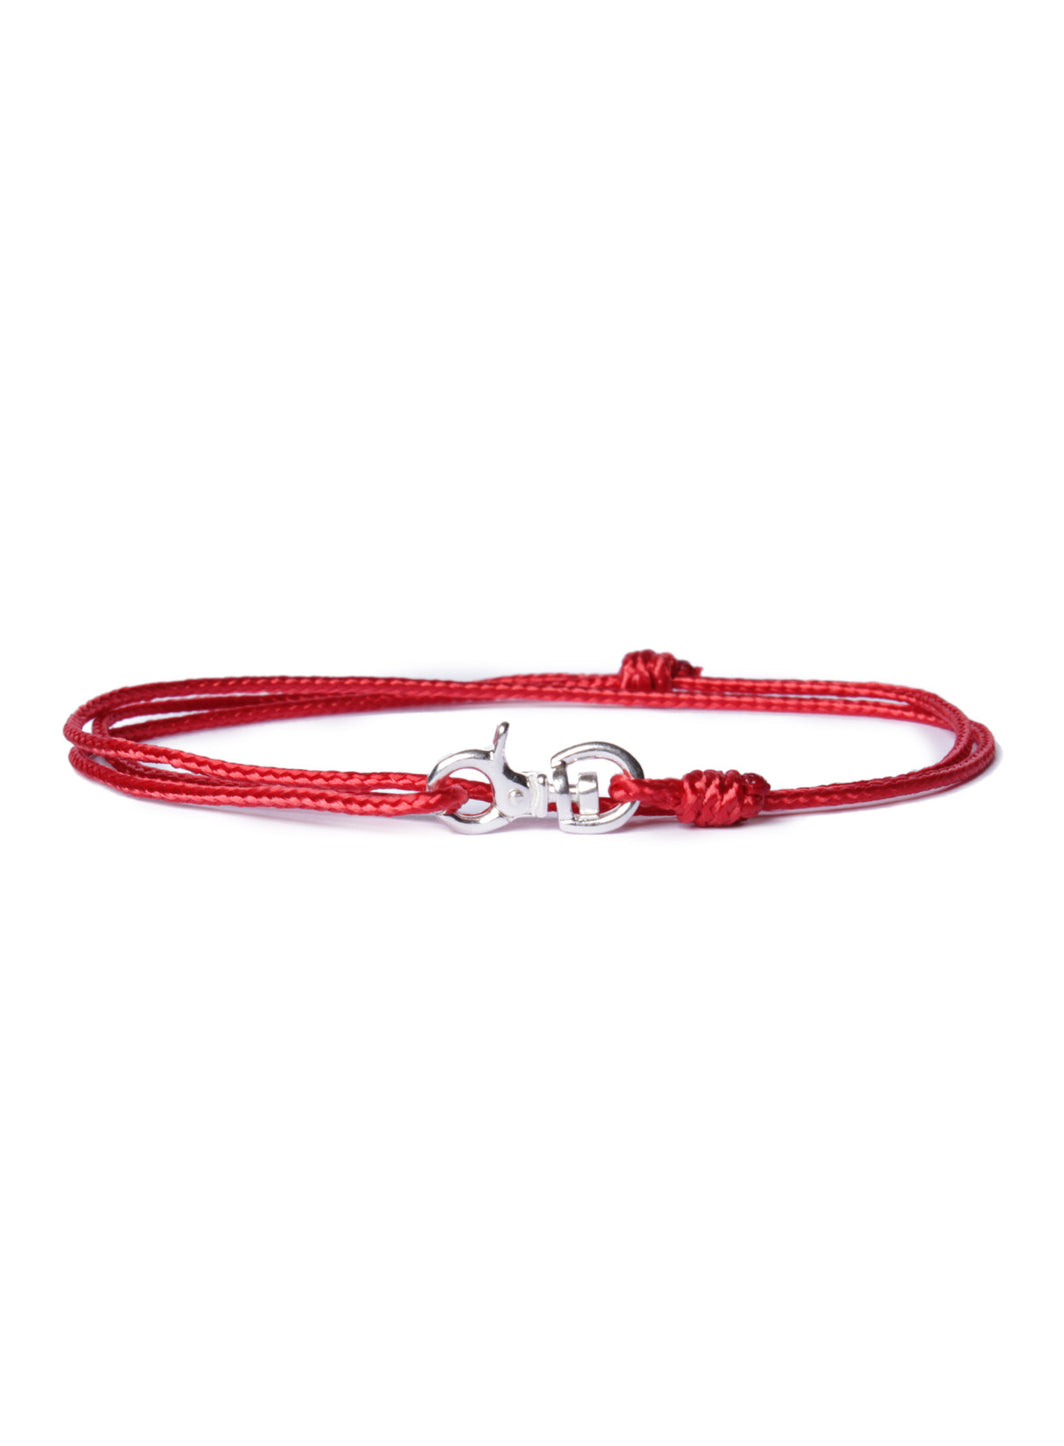 We Are All Smith "Faith" Sterling Silver Micro Cord Bracelet in Red